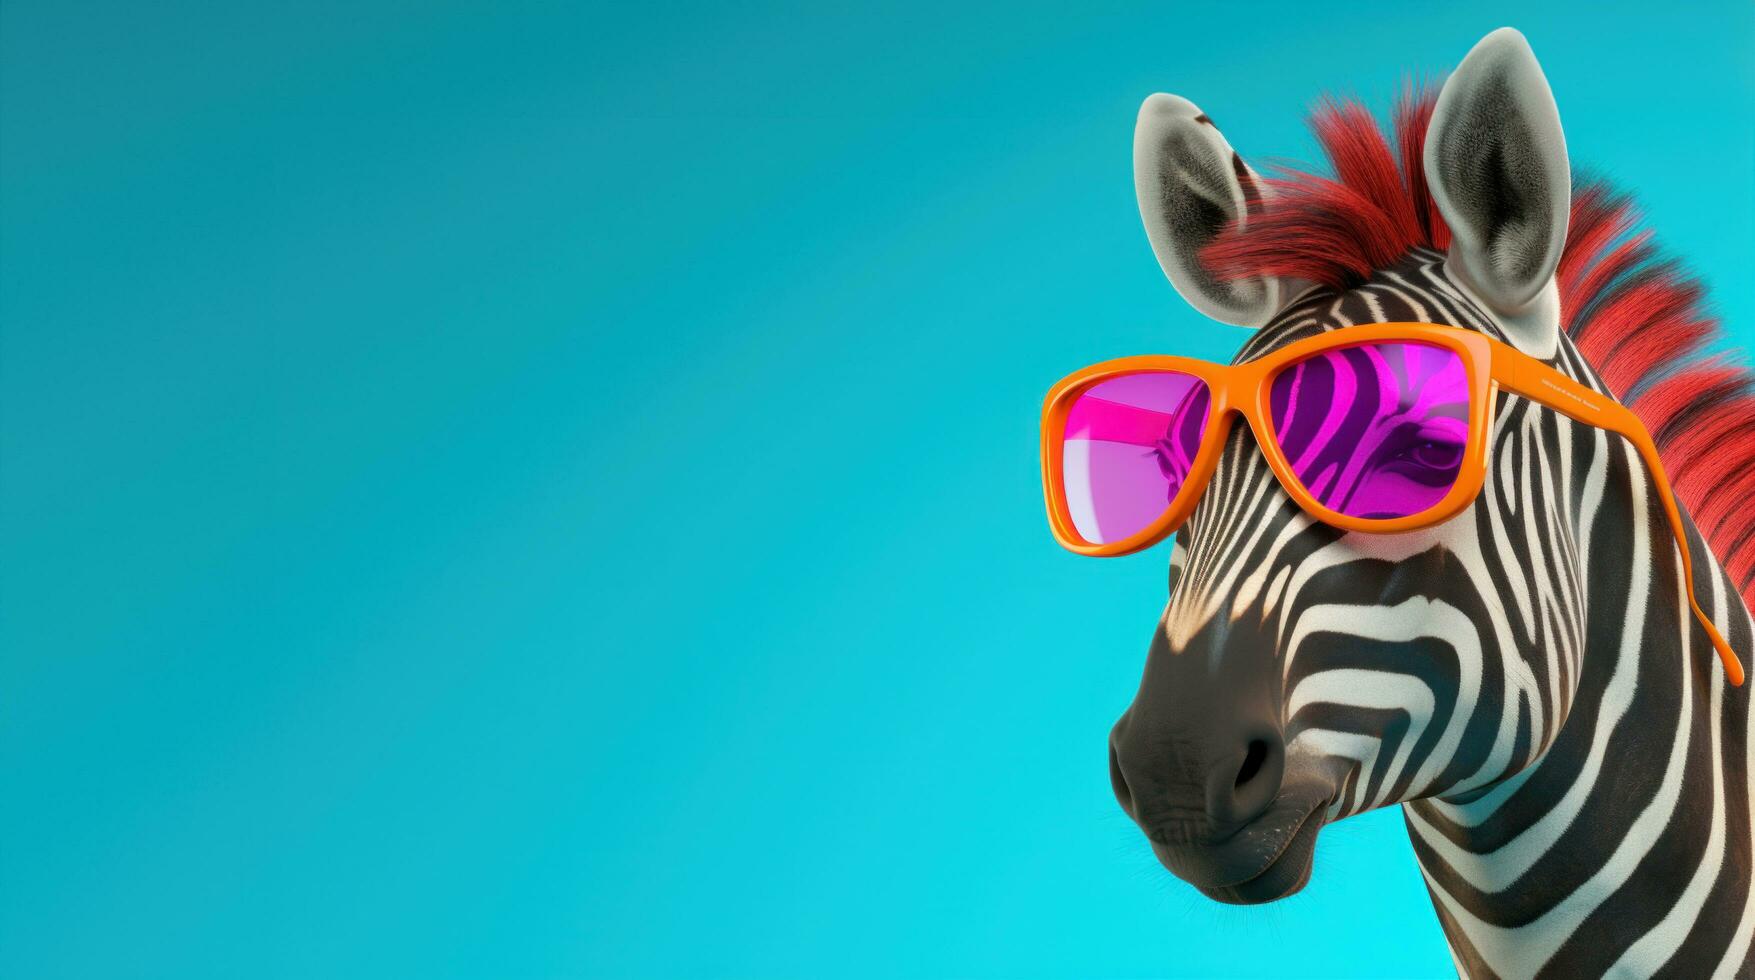 AI generated funny zebra wearing sunglasses over the eyes with text caption about zebras photo